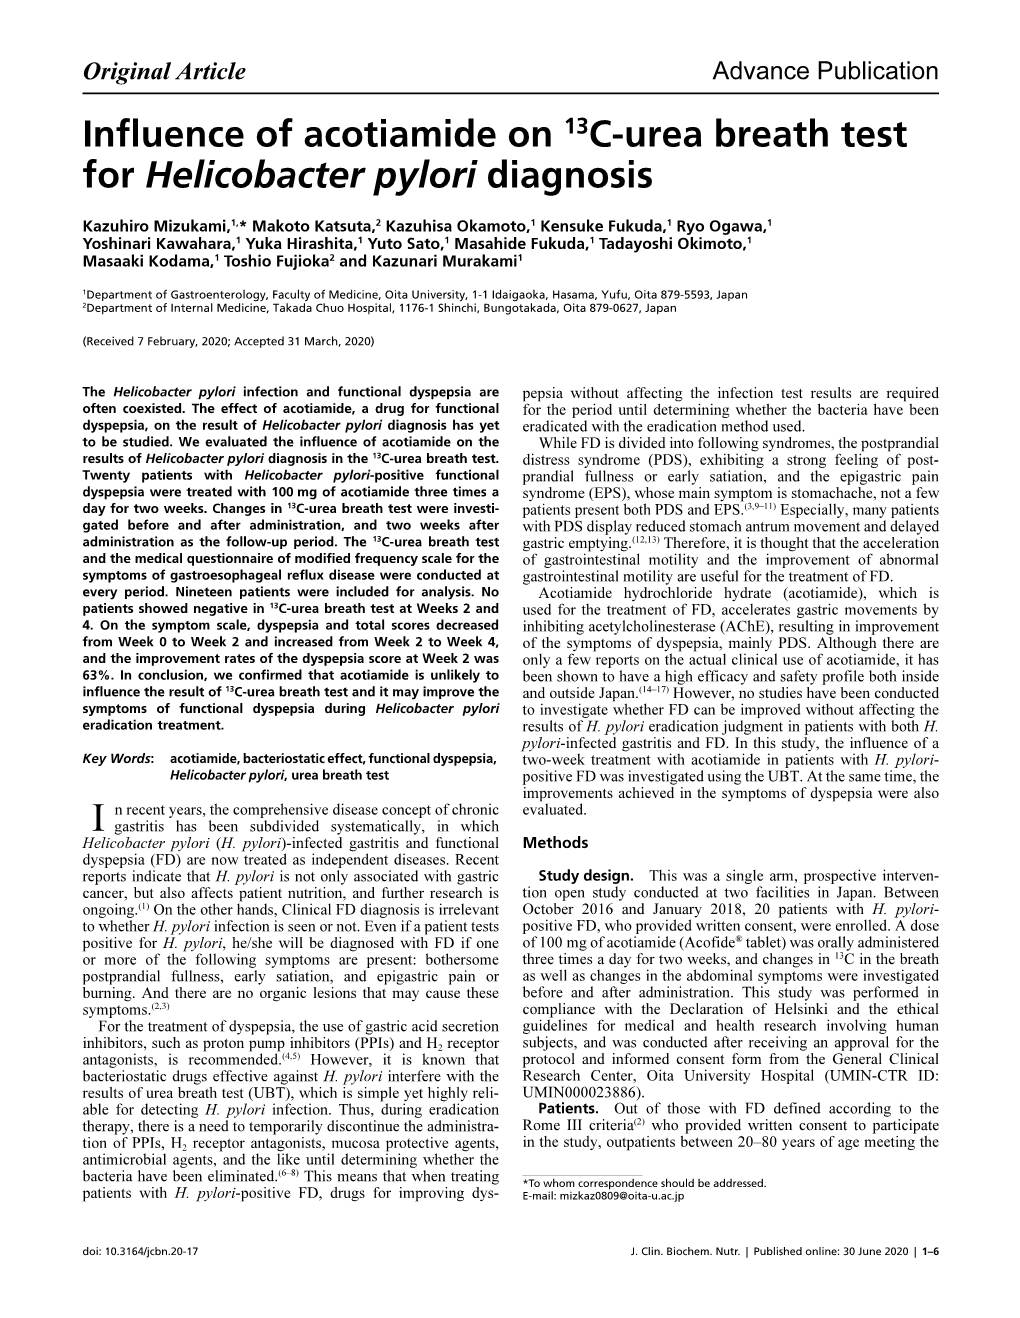 Influence of Acotiamide on 13C-Urea Breath Test for Helicobacter Pylori